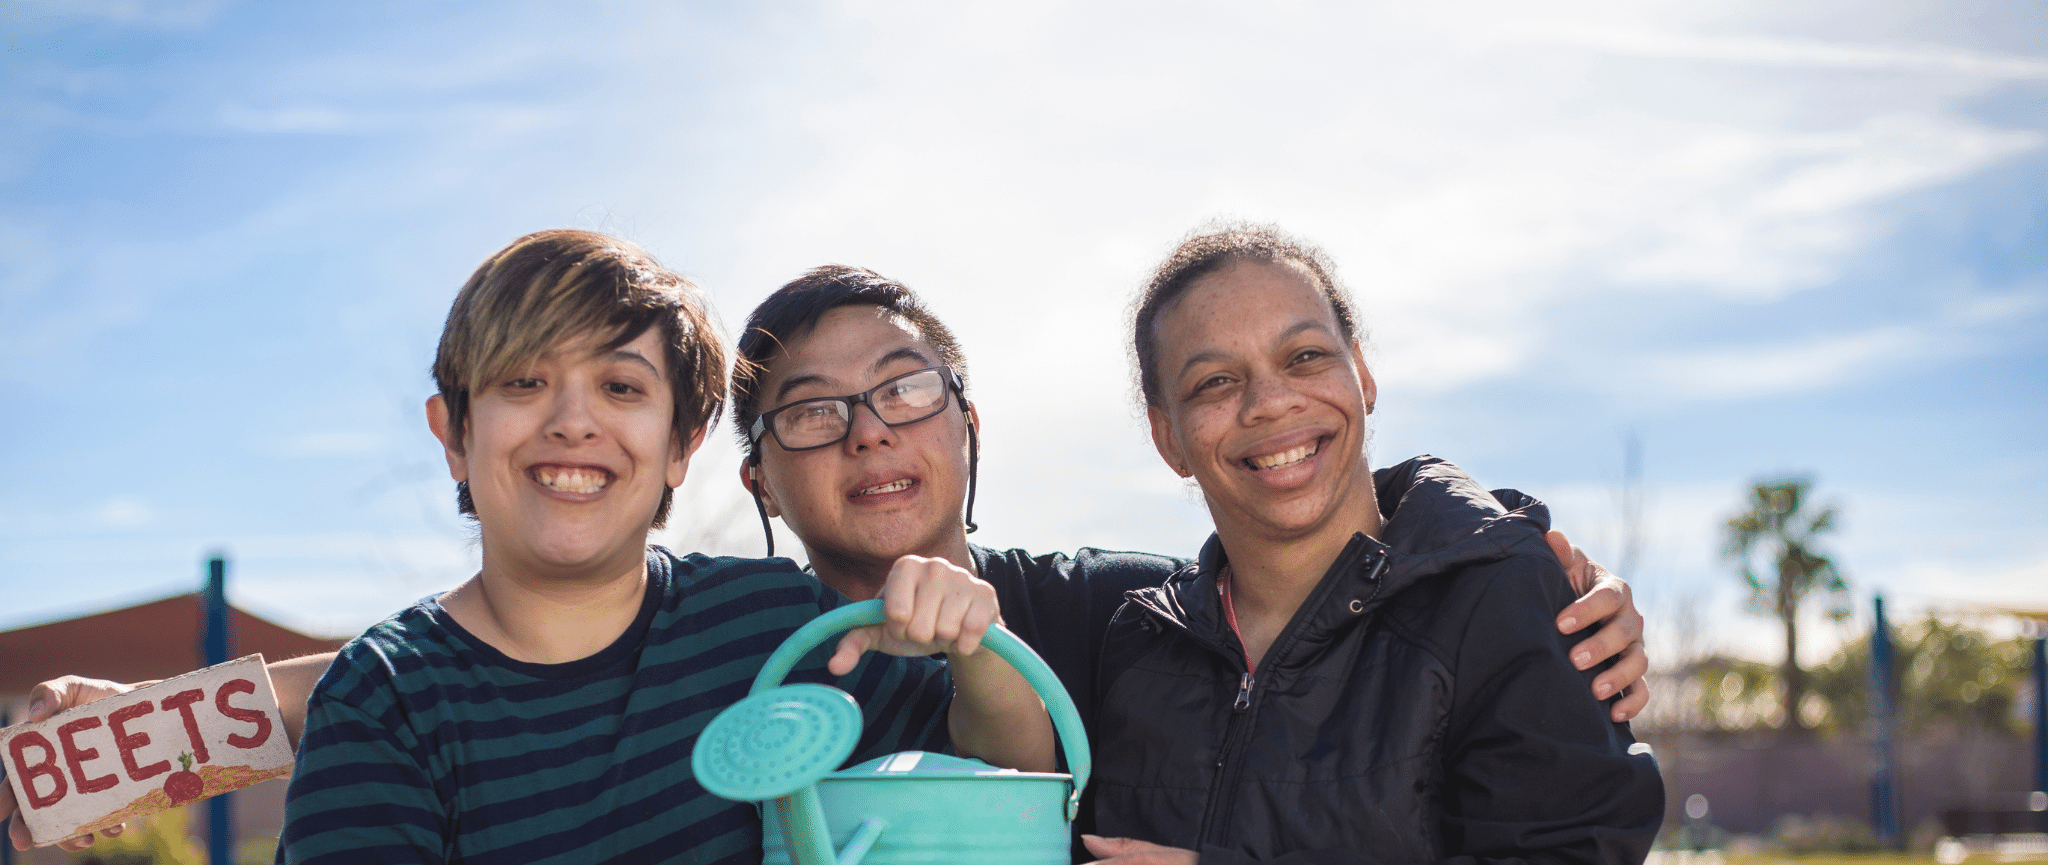 Three, young people from diverse backgrounds smiling